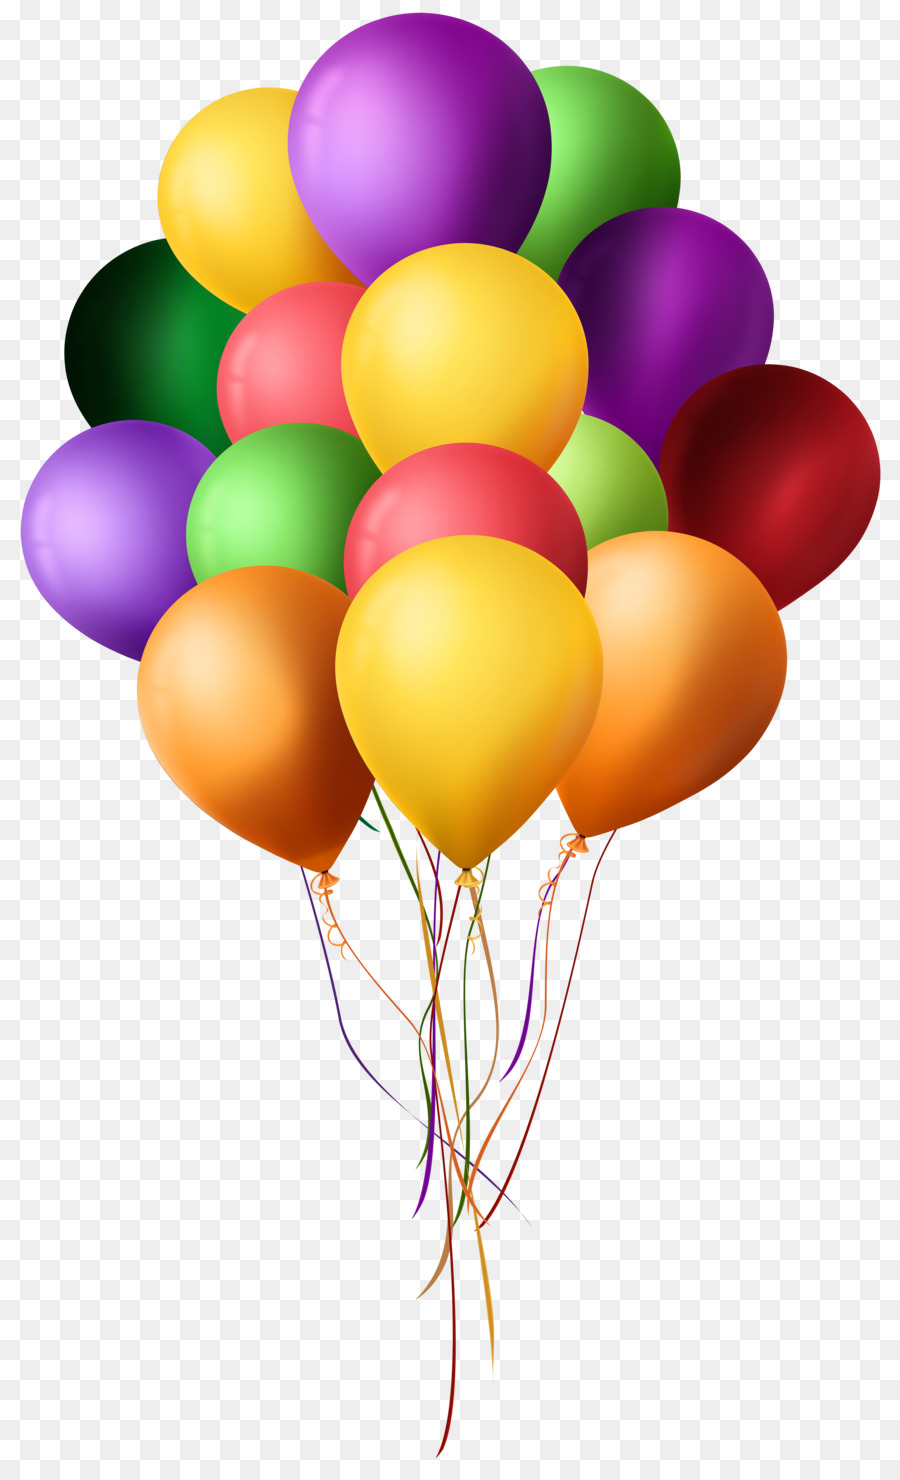 Birthday Balloon Clip art - Balloons Transparent Picture png download ...